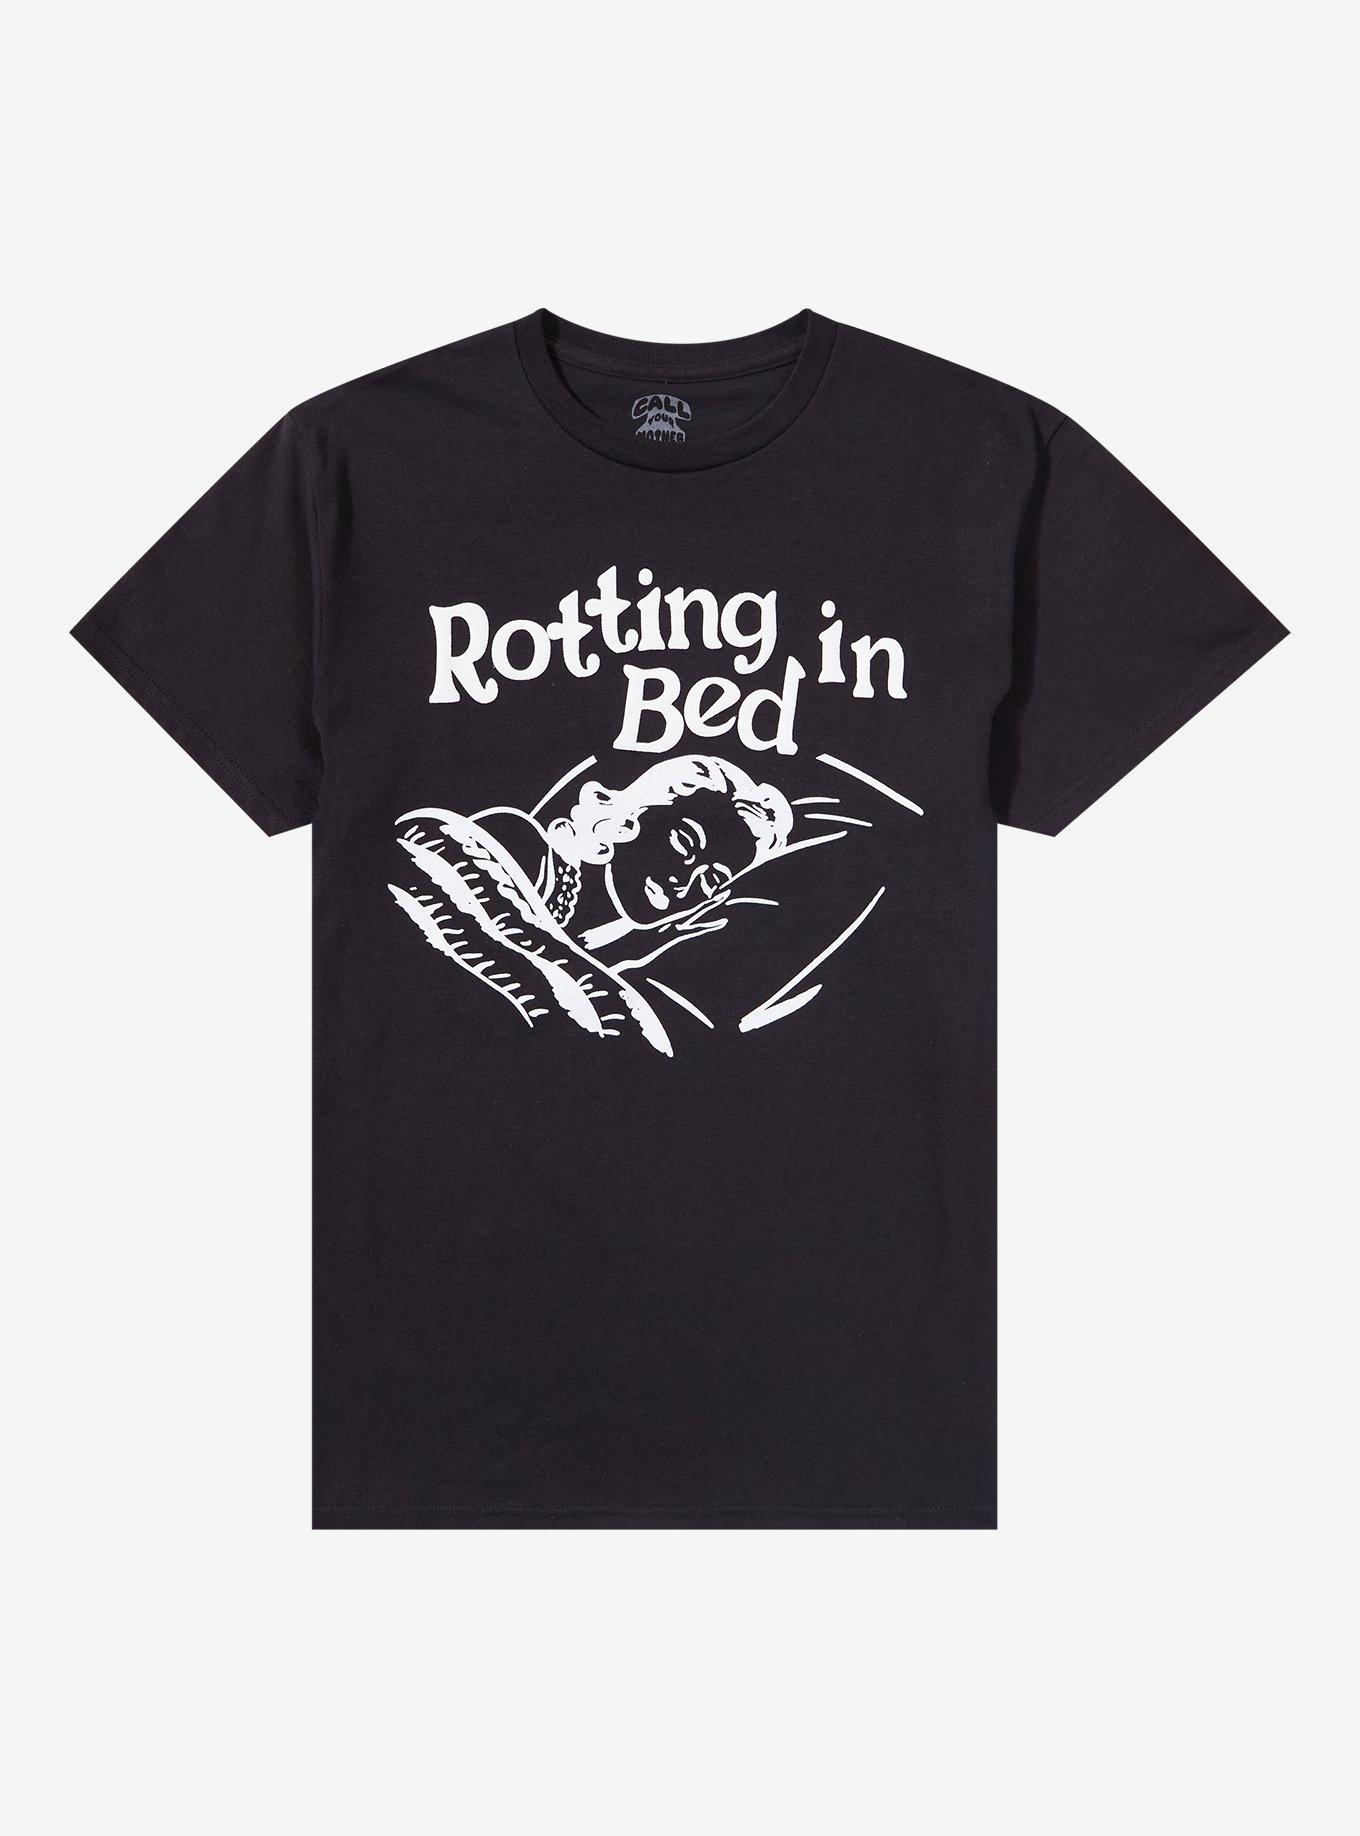 Rotting In Bed T-Shirt By Call Your Mother, BLACK, hi-res